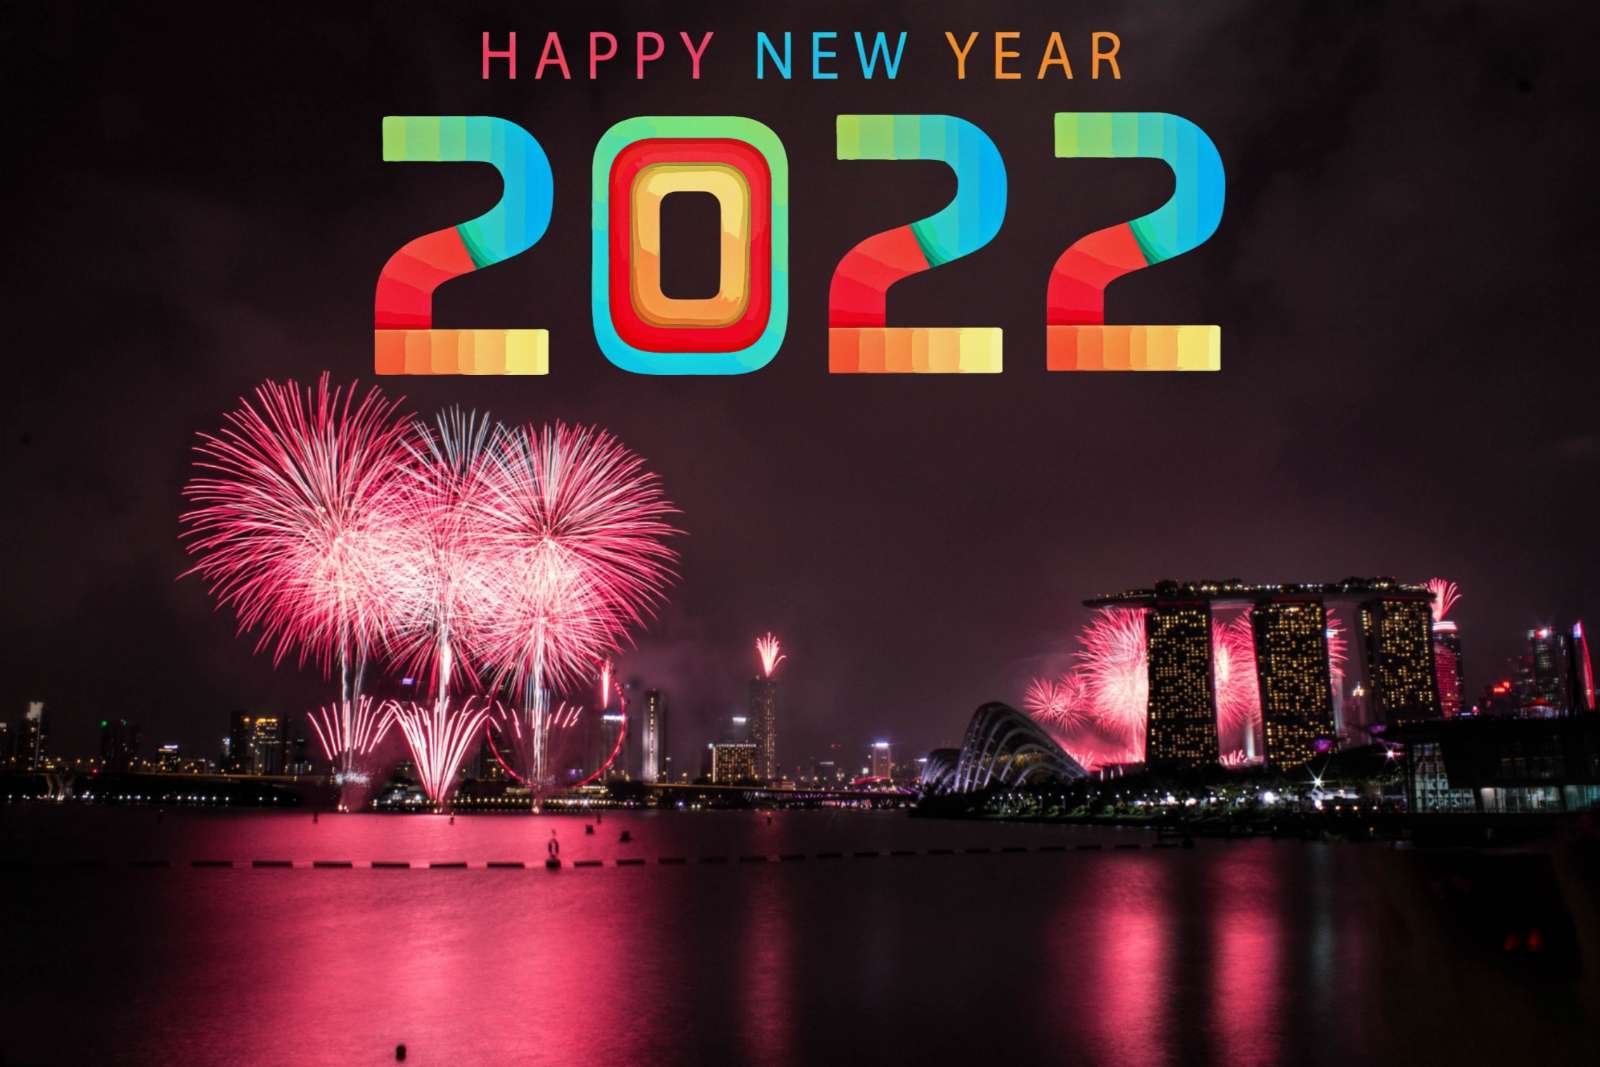 Happy New Year 2022 Images Free Download